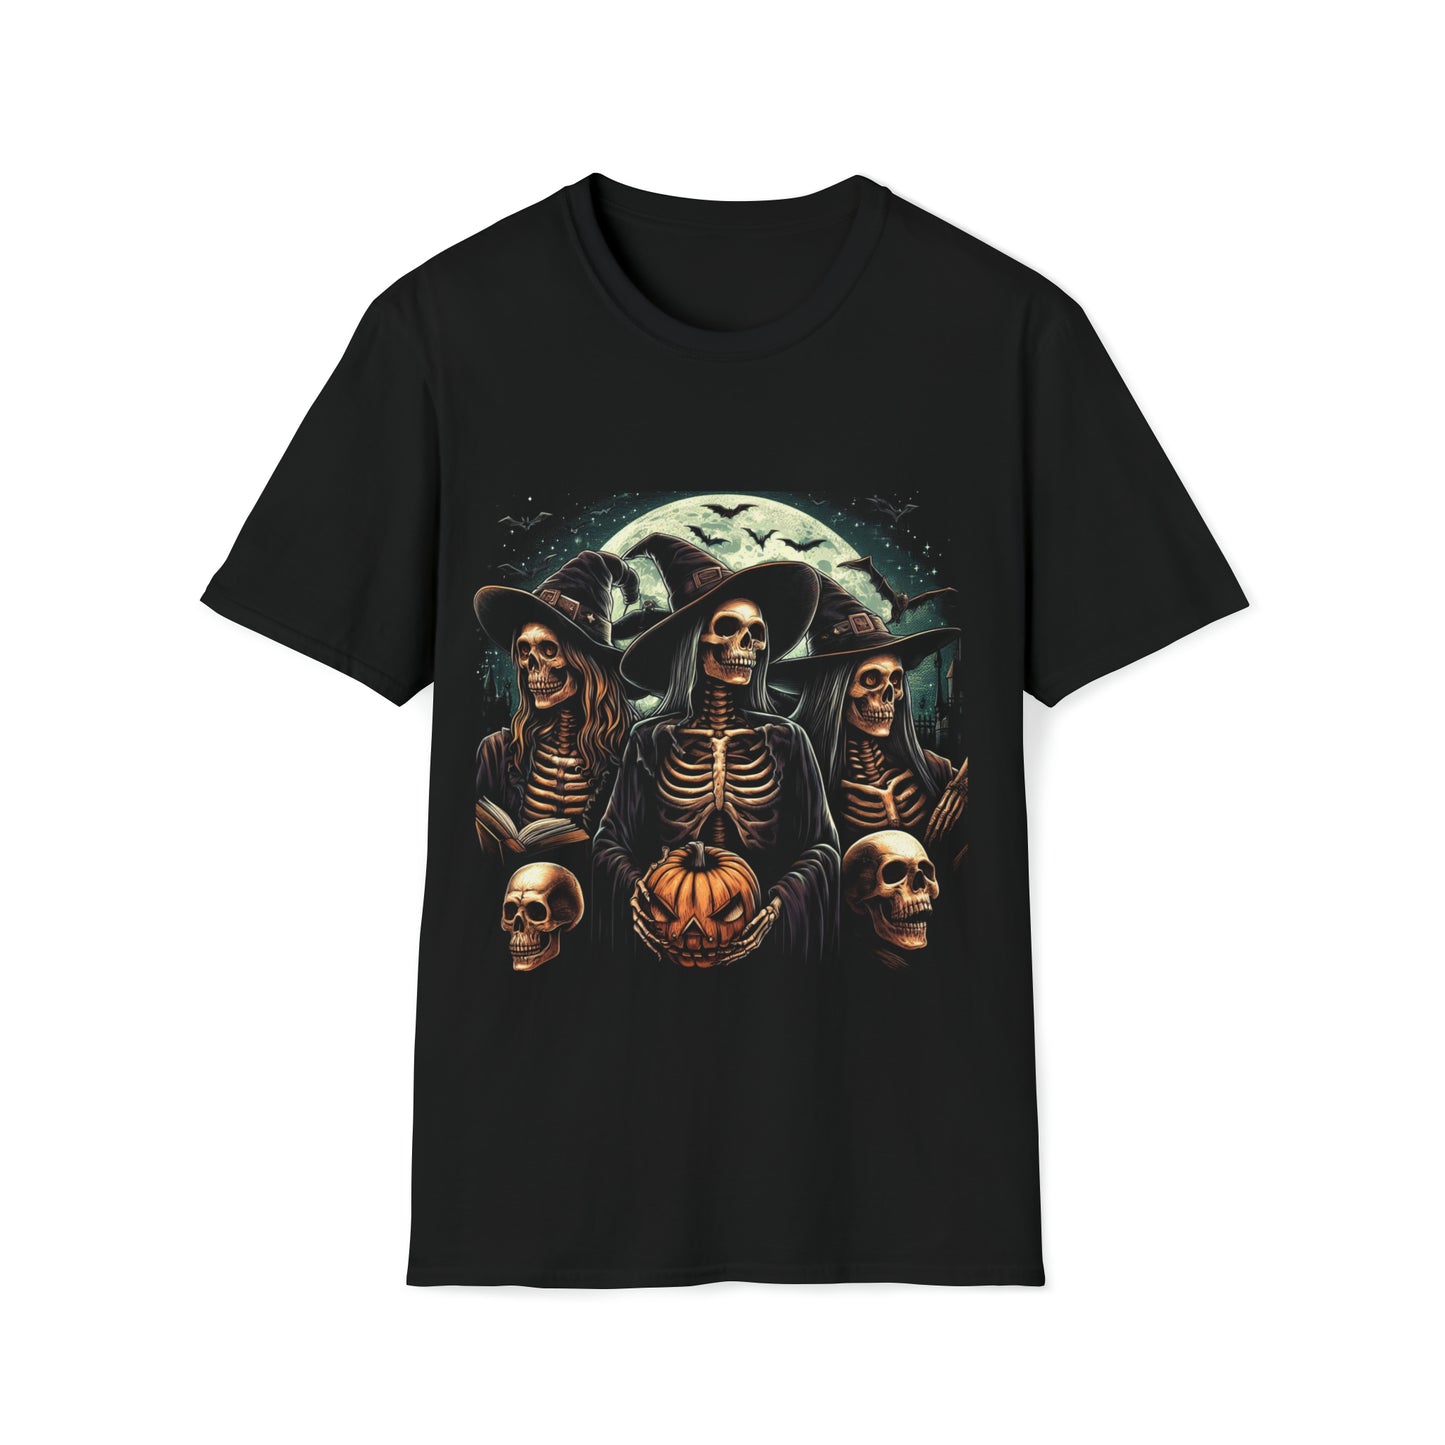 Halloween Witches T-Shirt - Brewing Up Magic and Mischief